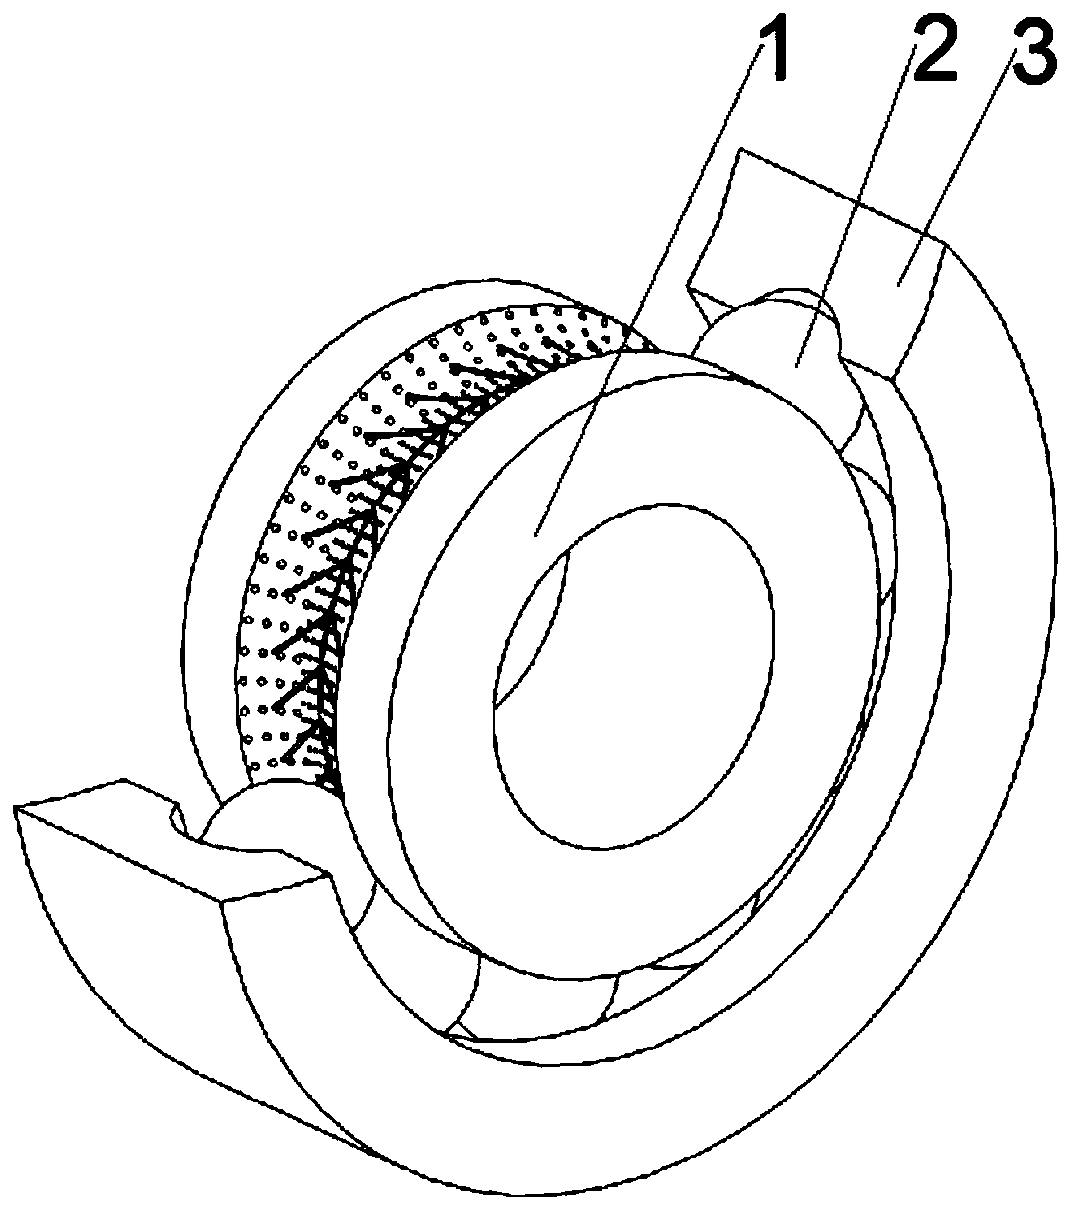 Rolling bearing inner ring raceway and rolling bearing